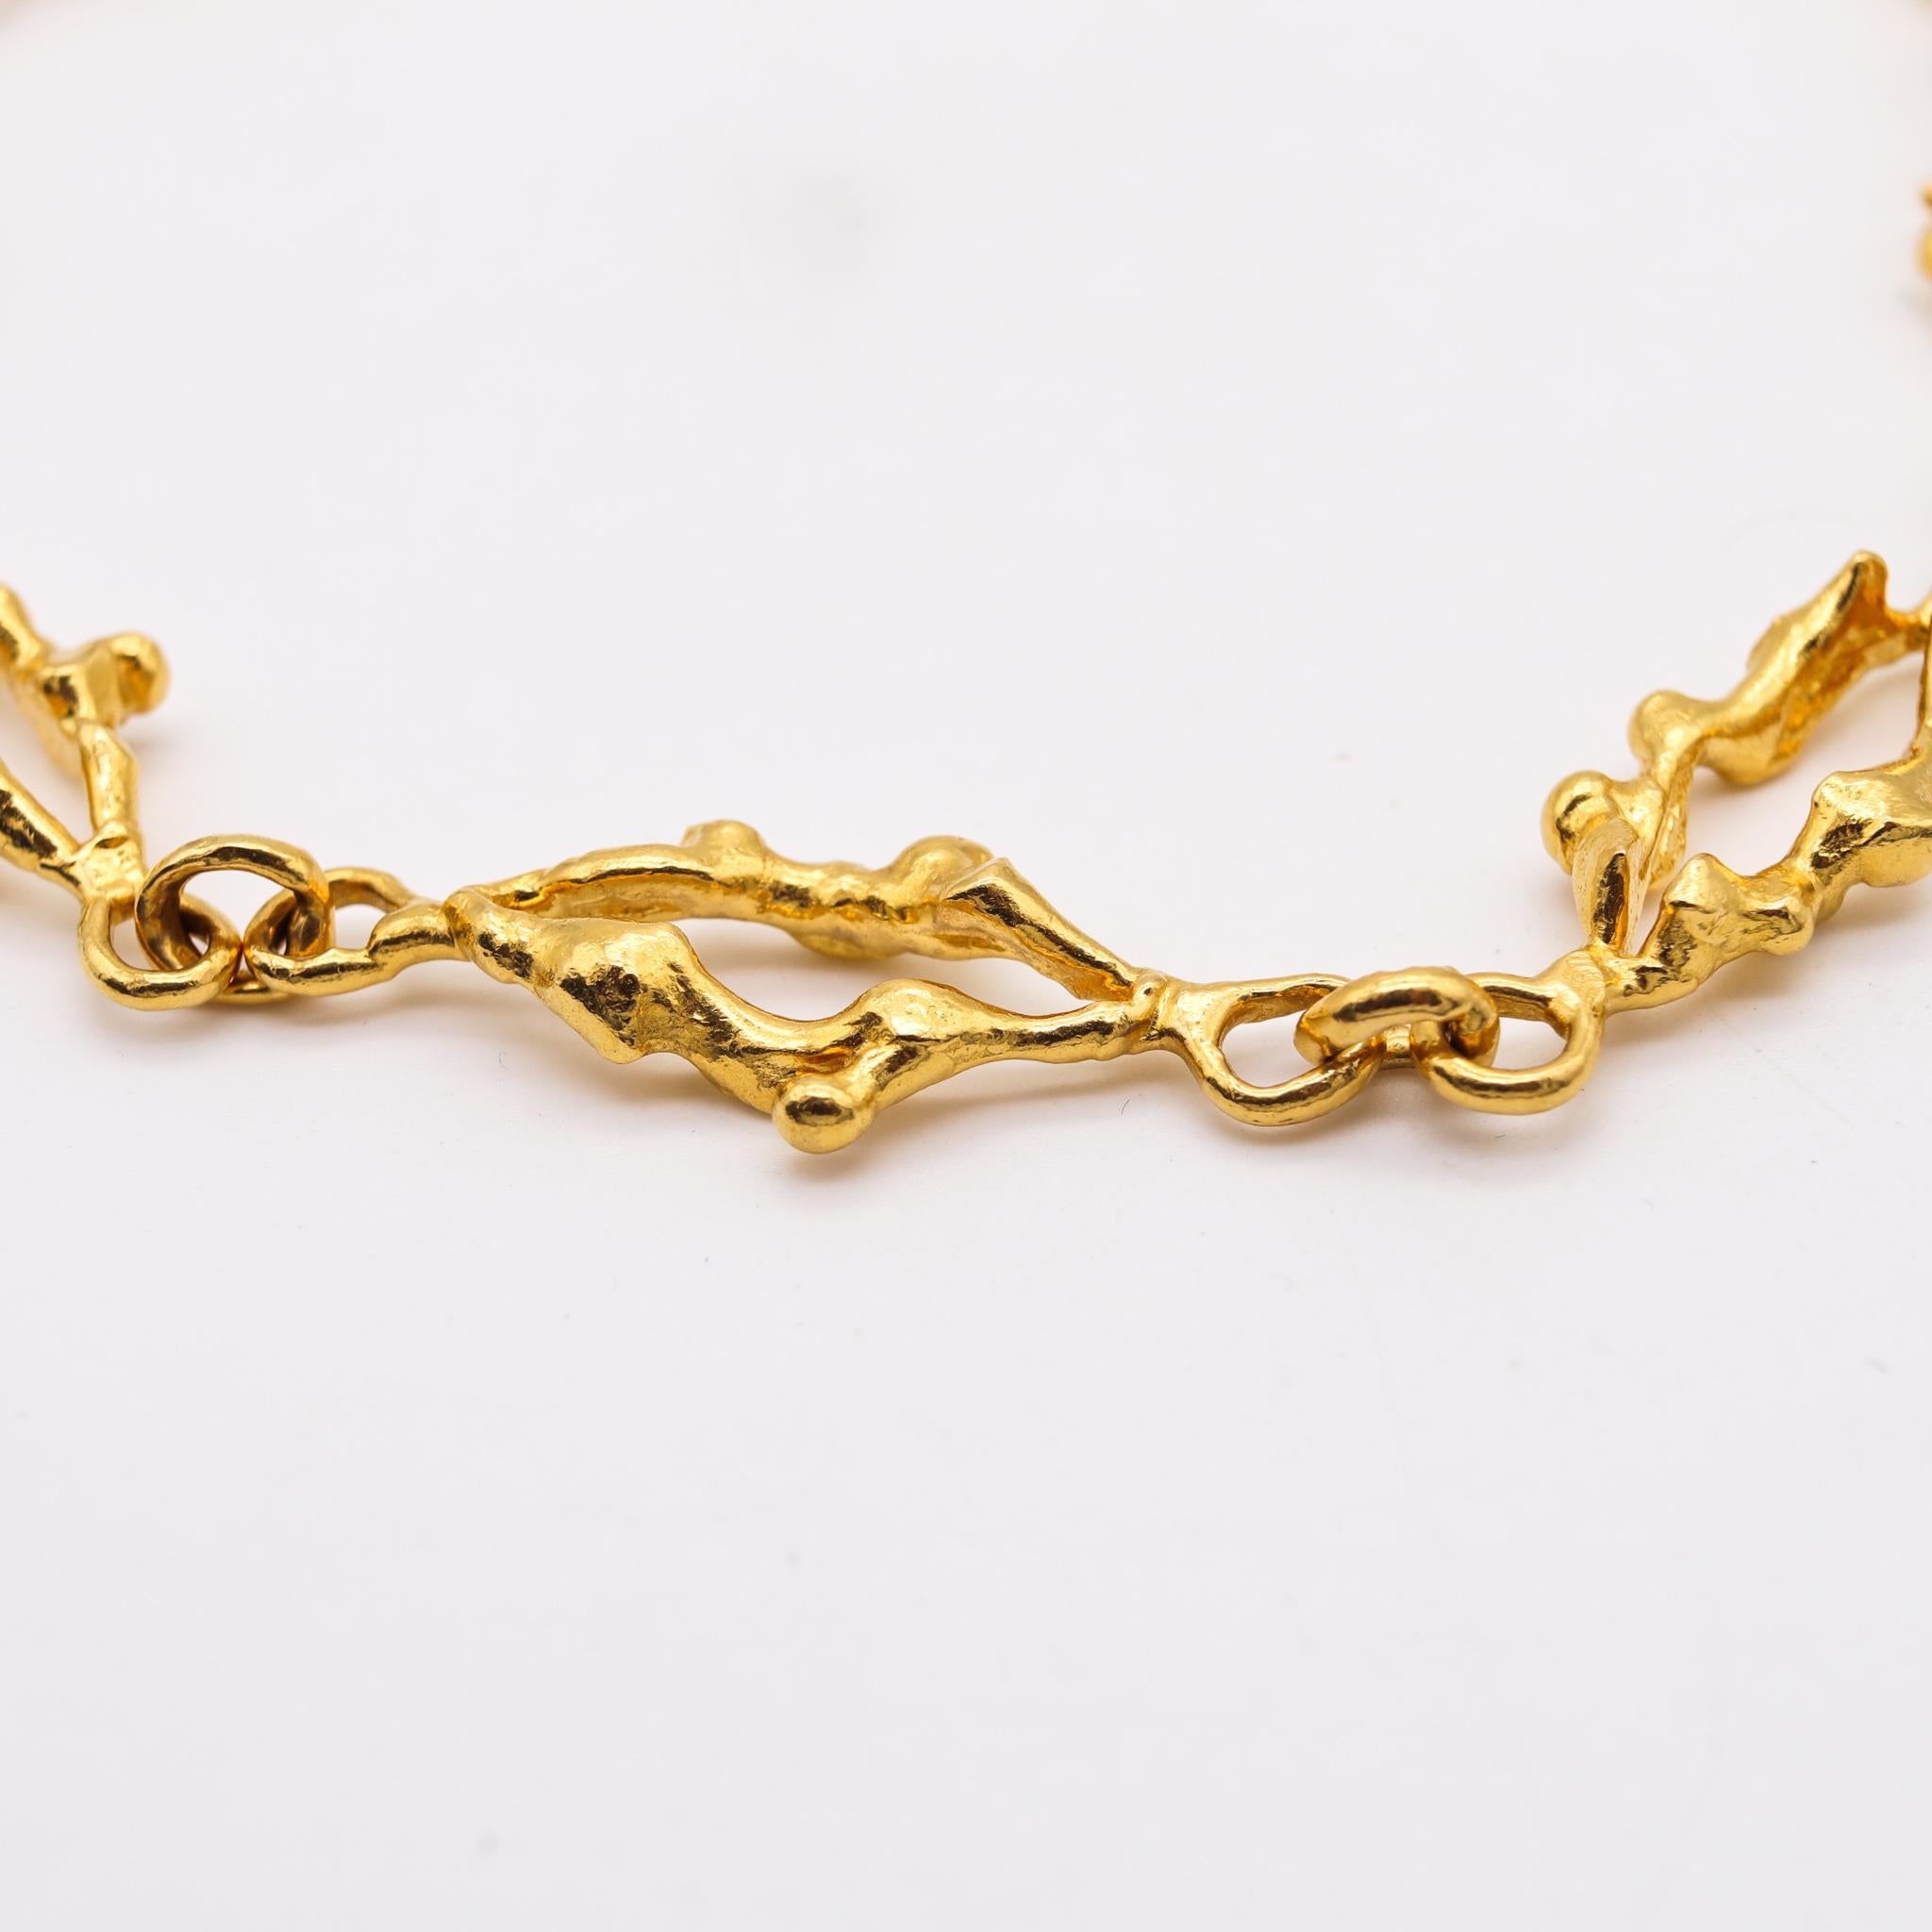 Jean Mahie 1970 Paris Rare Vintage Sautoir Necklace in Textured 22Kt Yellow Gold In Excellent Condition For Sale In Miami, FL